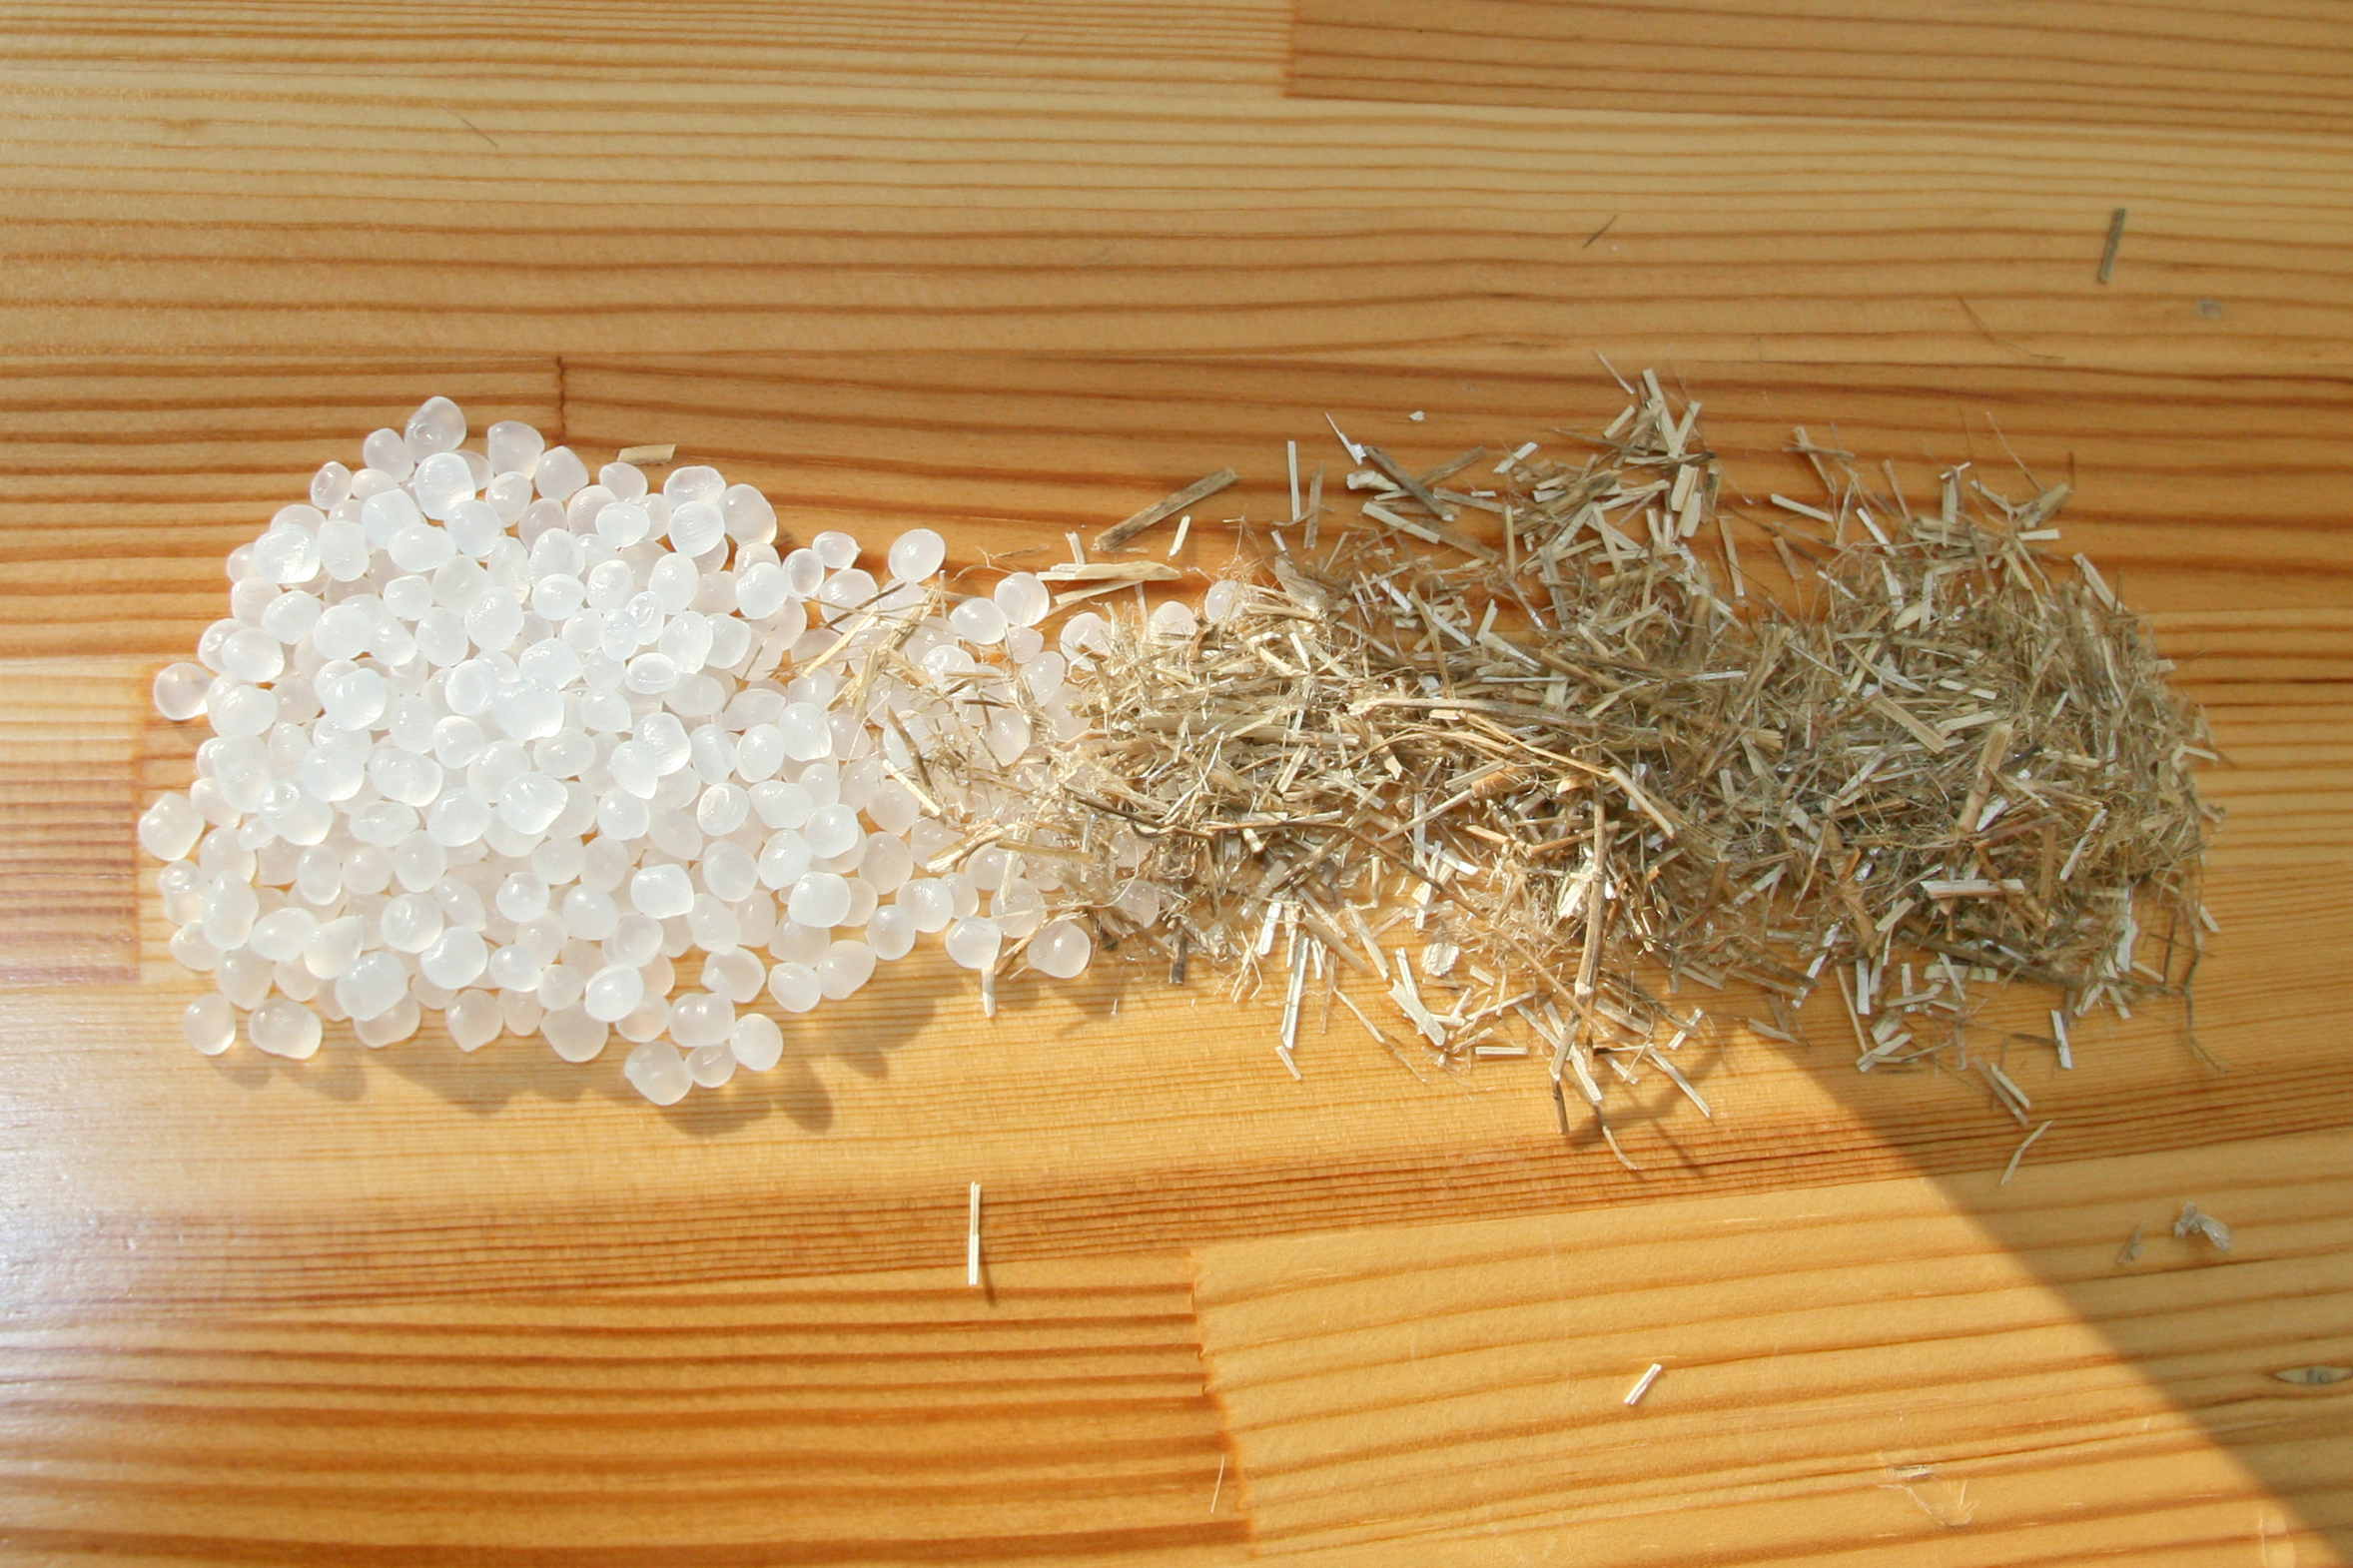 Polymers are produced from renewable raw materials such as straw using catalytic processes.